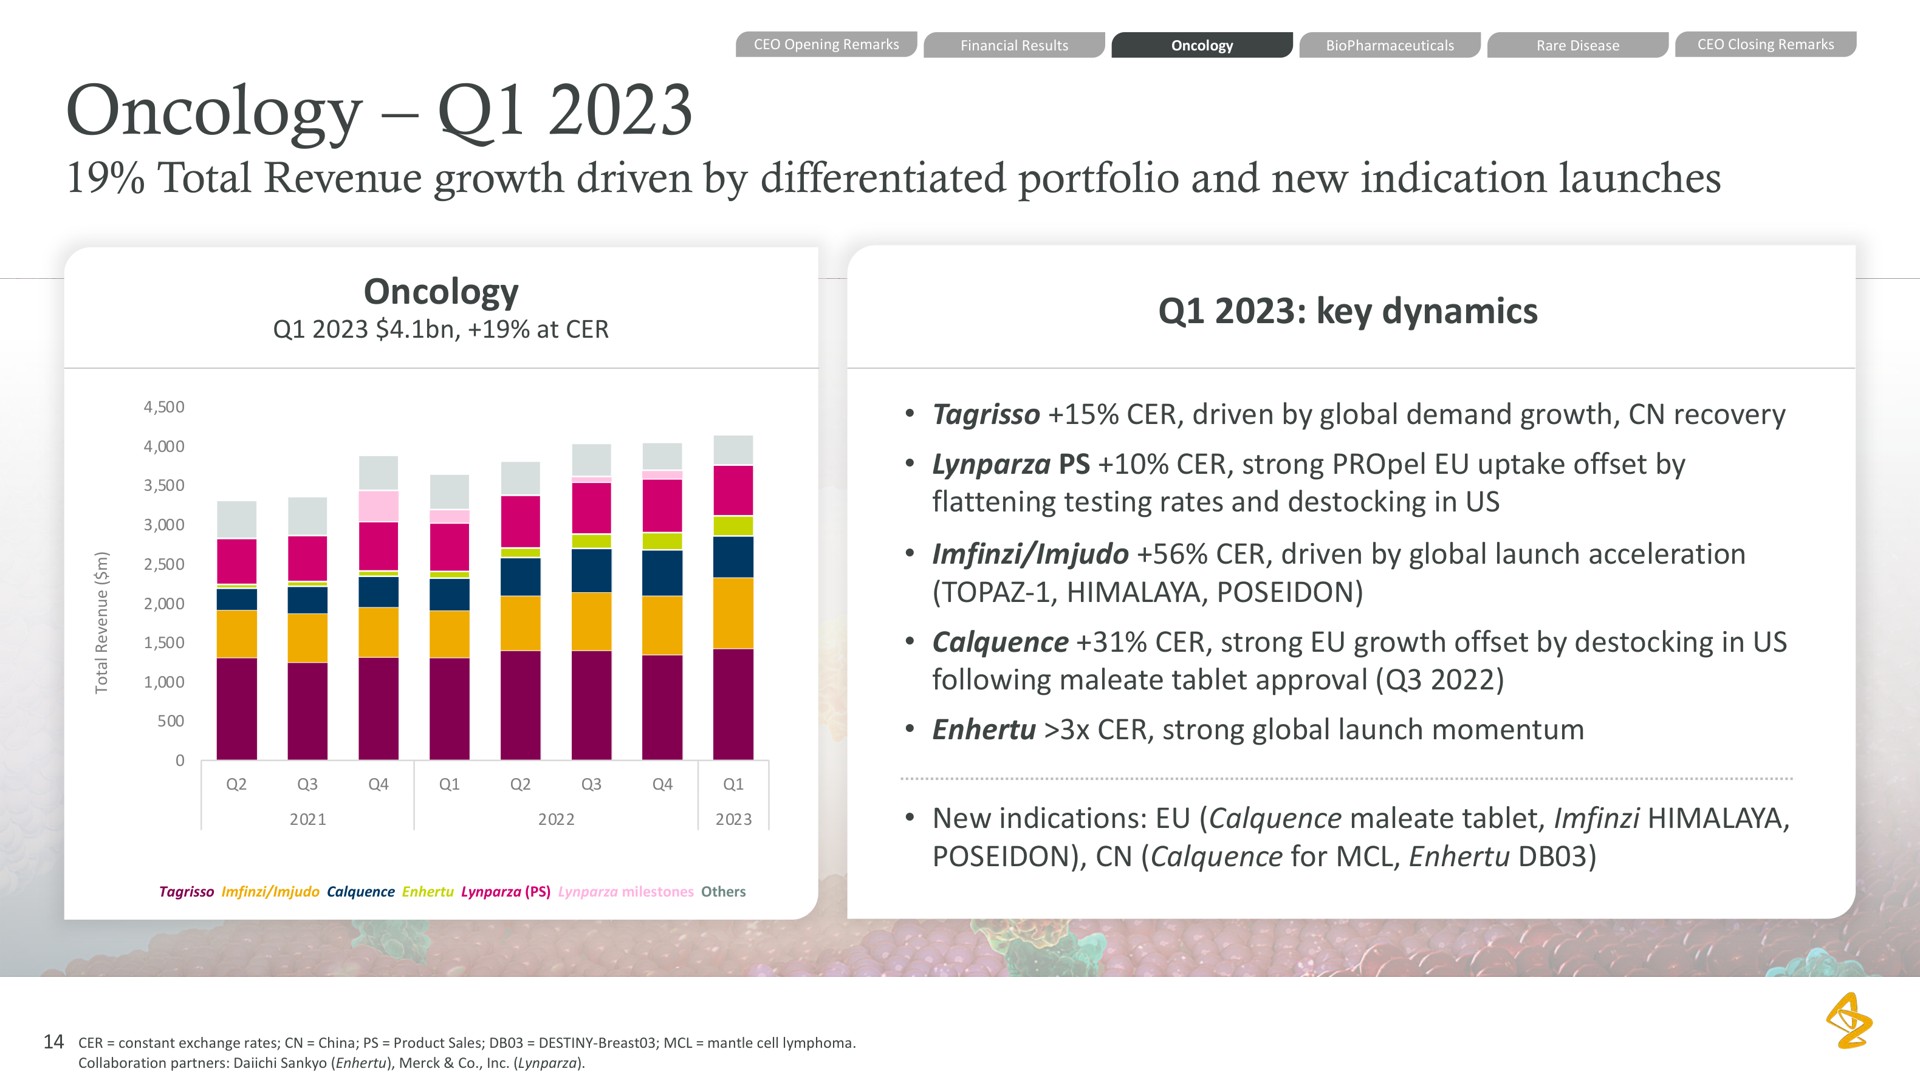 oncology total revenue growth driven by differentiated portfolio and new indication launches oncology key dynamics driven by global demand growth recovery strong uptake offset by flattening testing rates and in us driven by global launch acceleration revenues driven by continued her low bolus topaz strong growth offset by in us following maleate tablet approval strong global launch momentum new indications maleate tablet for | AstraZeneca